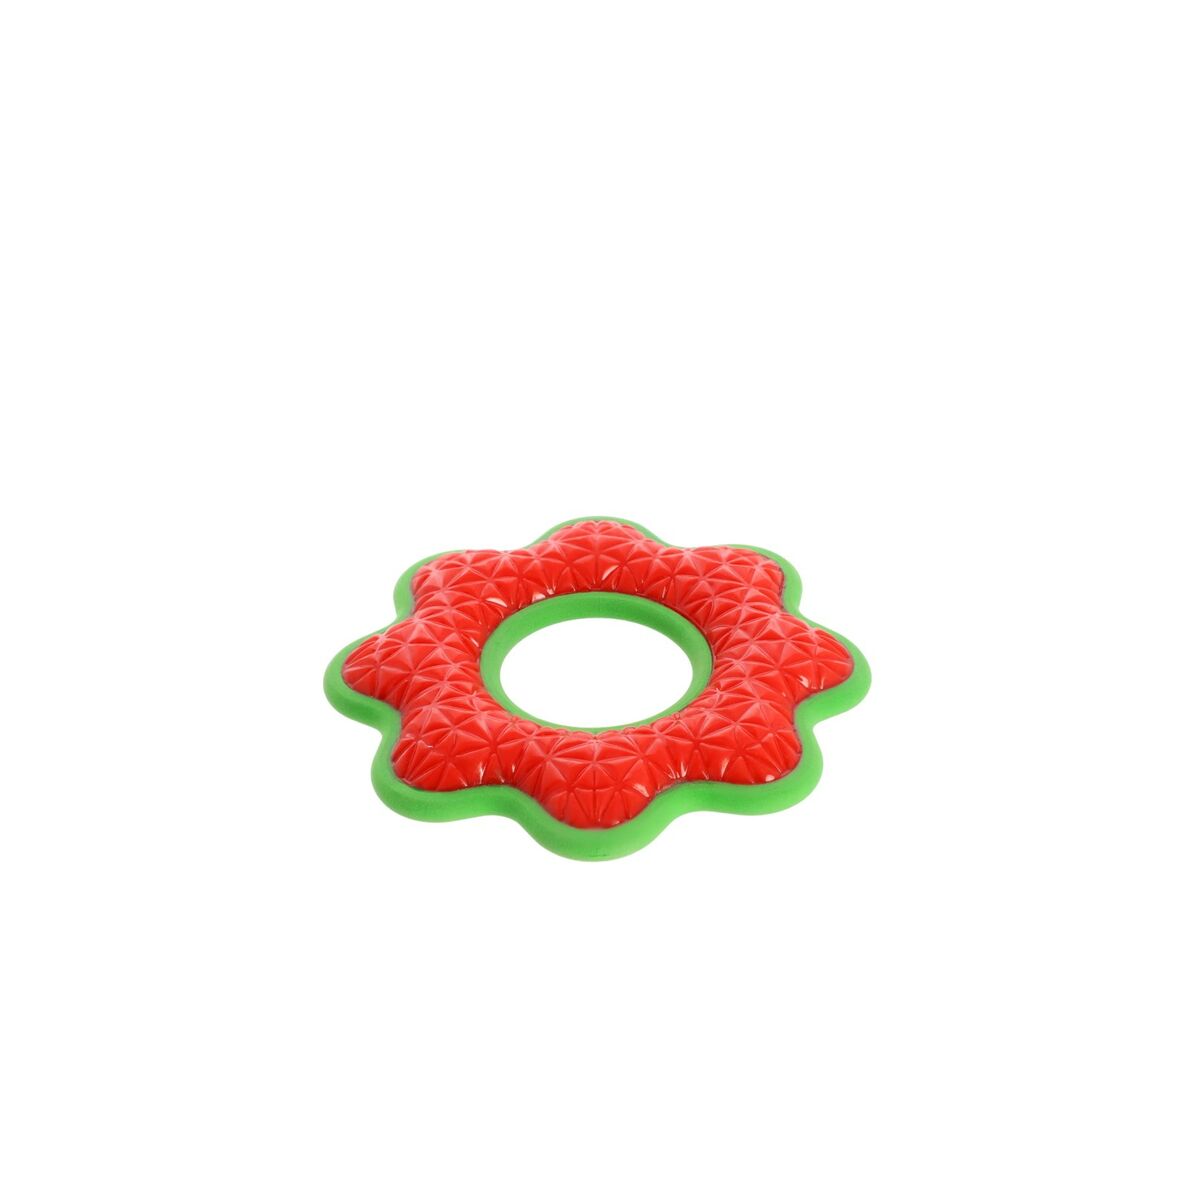 Dog toy Dingo 17393 Red Green Natural rubber 16,5 cm (1 Piece)